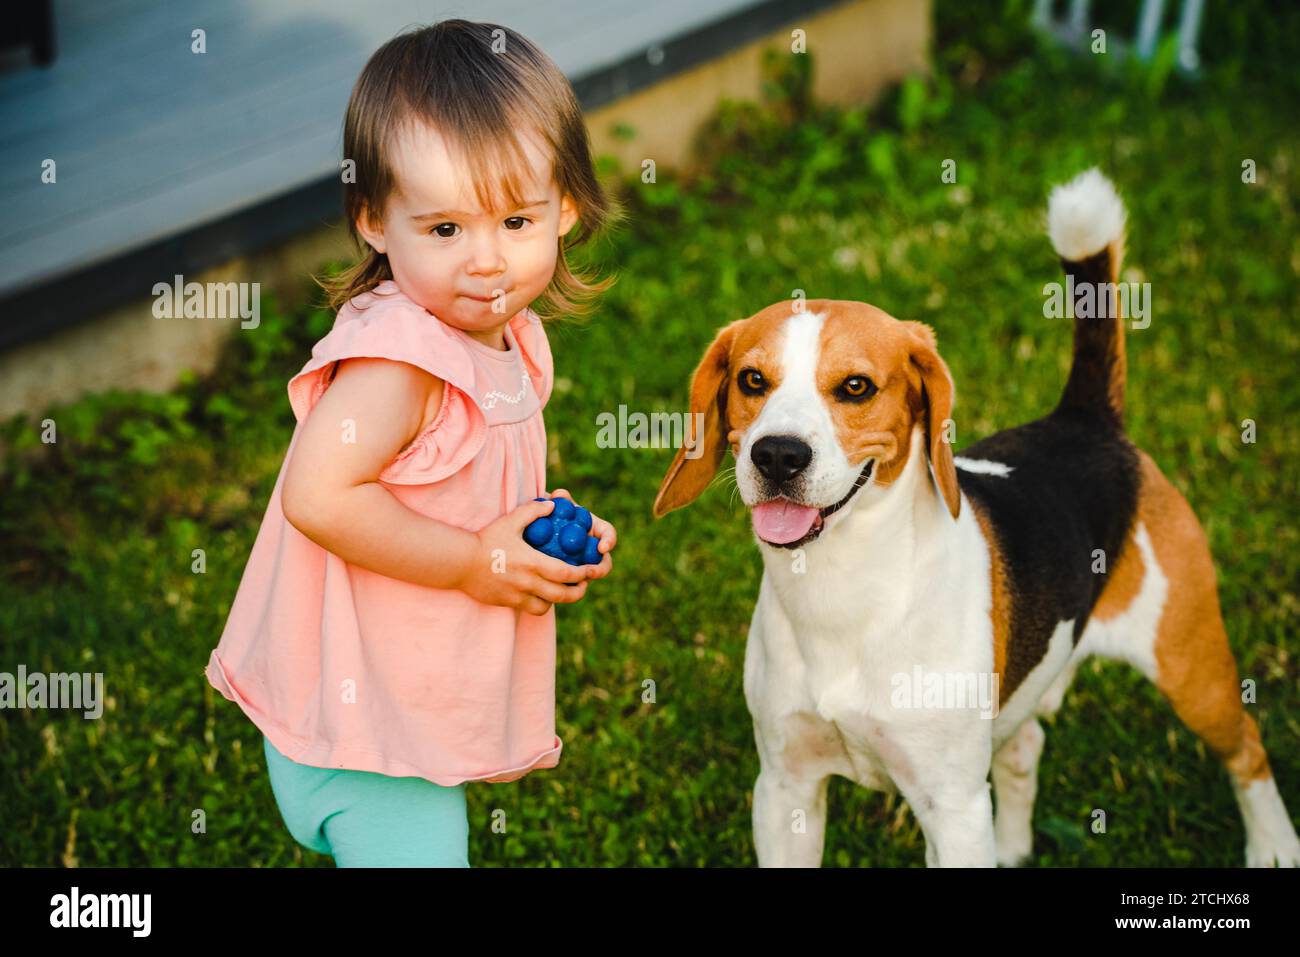 Cute baby girl together with beagle dog in garden in summer day. Domestic animal with children concept Stock Photo